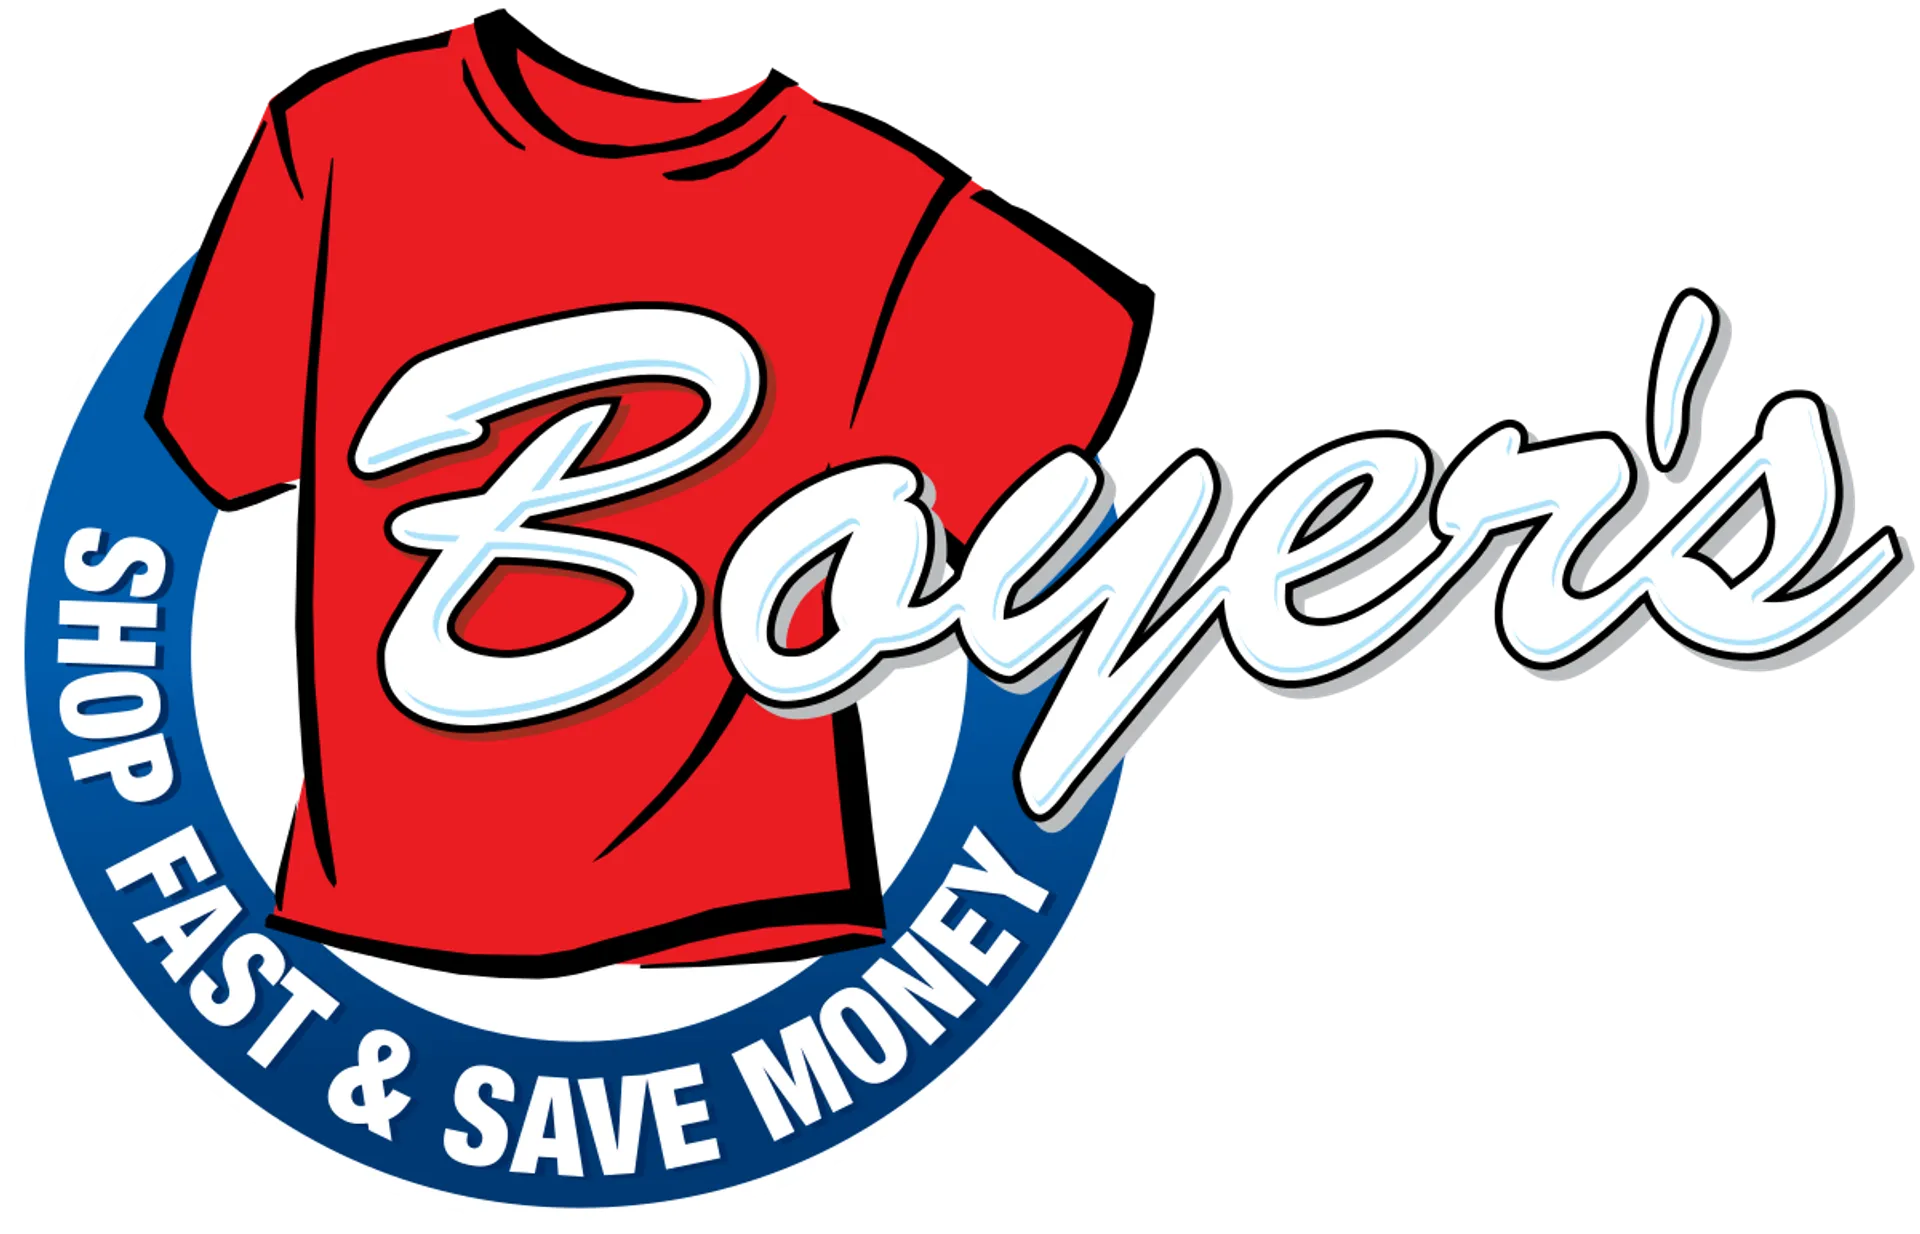 BOYER’S FOOD MARKET logo current weekly ad